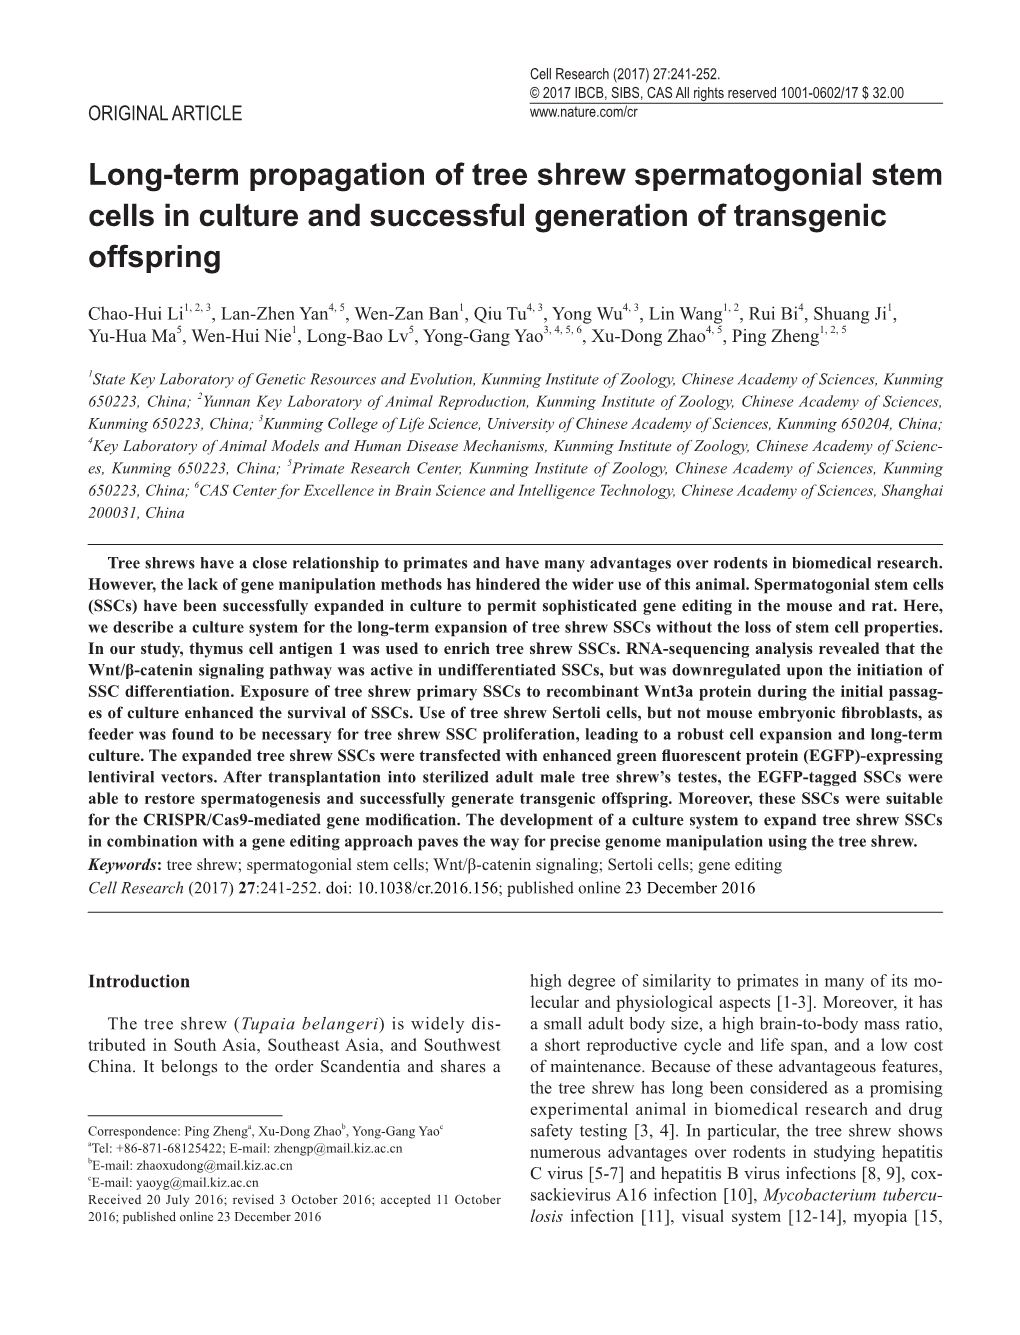 Long-Term Propagation of Tree Shrew Spermatogonial Stem Cells in Culture and Successful Generation of Transgenic Offspring